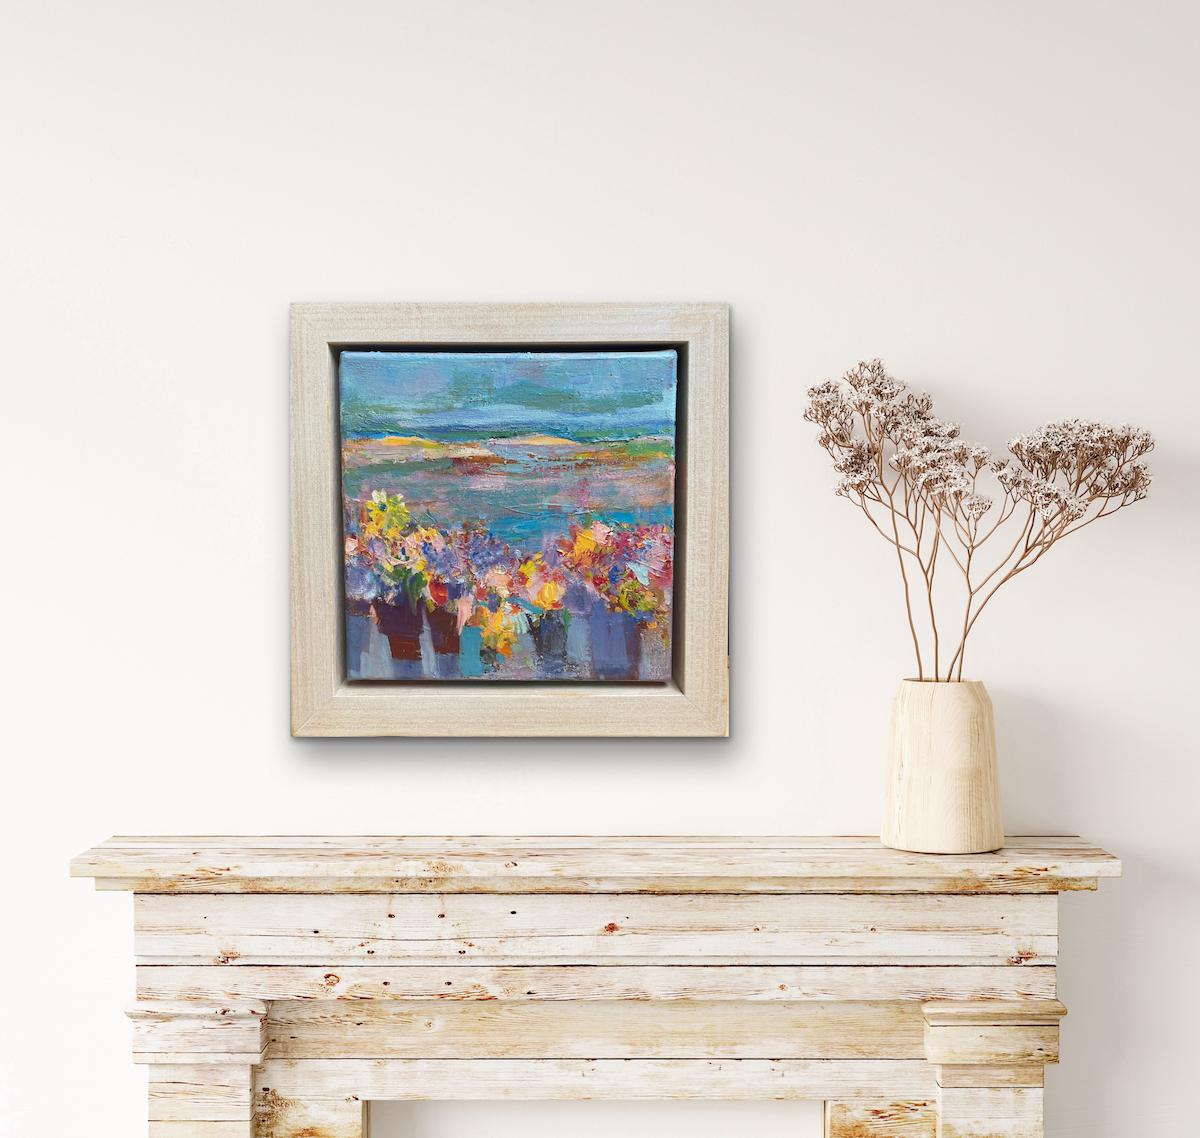 Still Life by the Estuary [2018]
original and hand signed by the artist

oil on canvas

Image size: H:30 cm x W:30 cm

Complete Size of Unframed Work: H:30 cm x W:30 cm x D:6cm

Frame Size: H:40 cm x W:40 cm x D:6cm

Sold Framed

Please note that